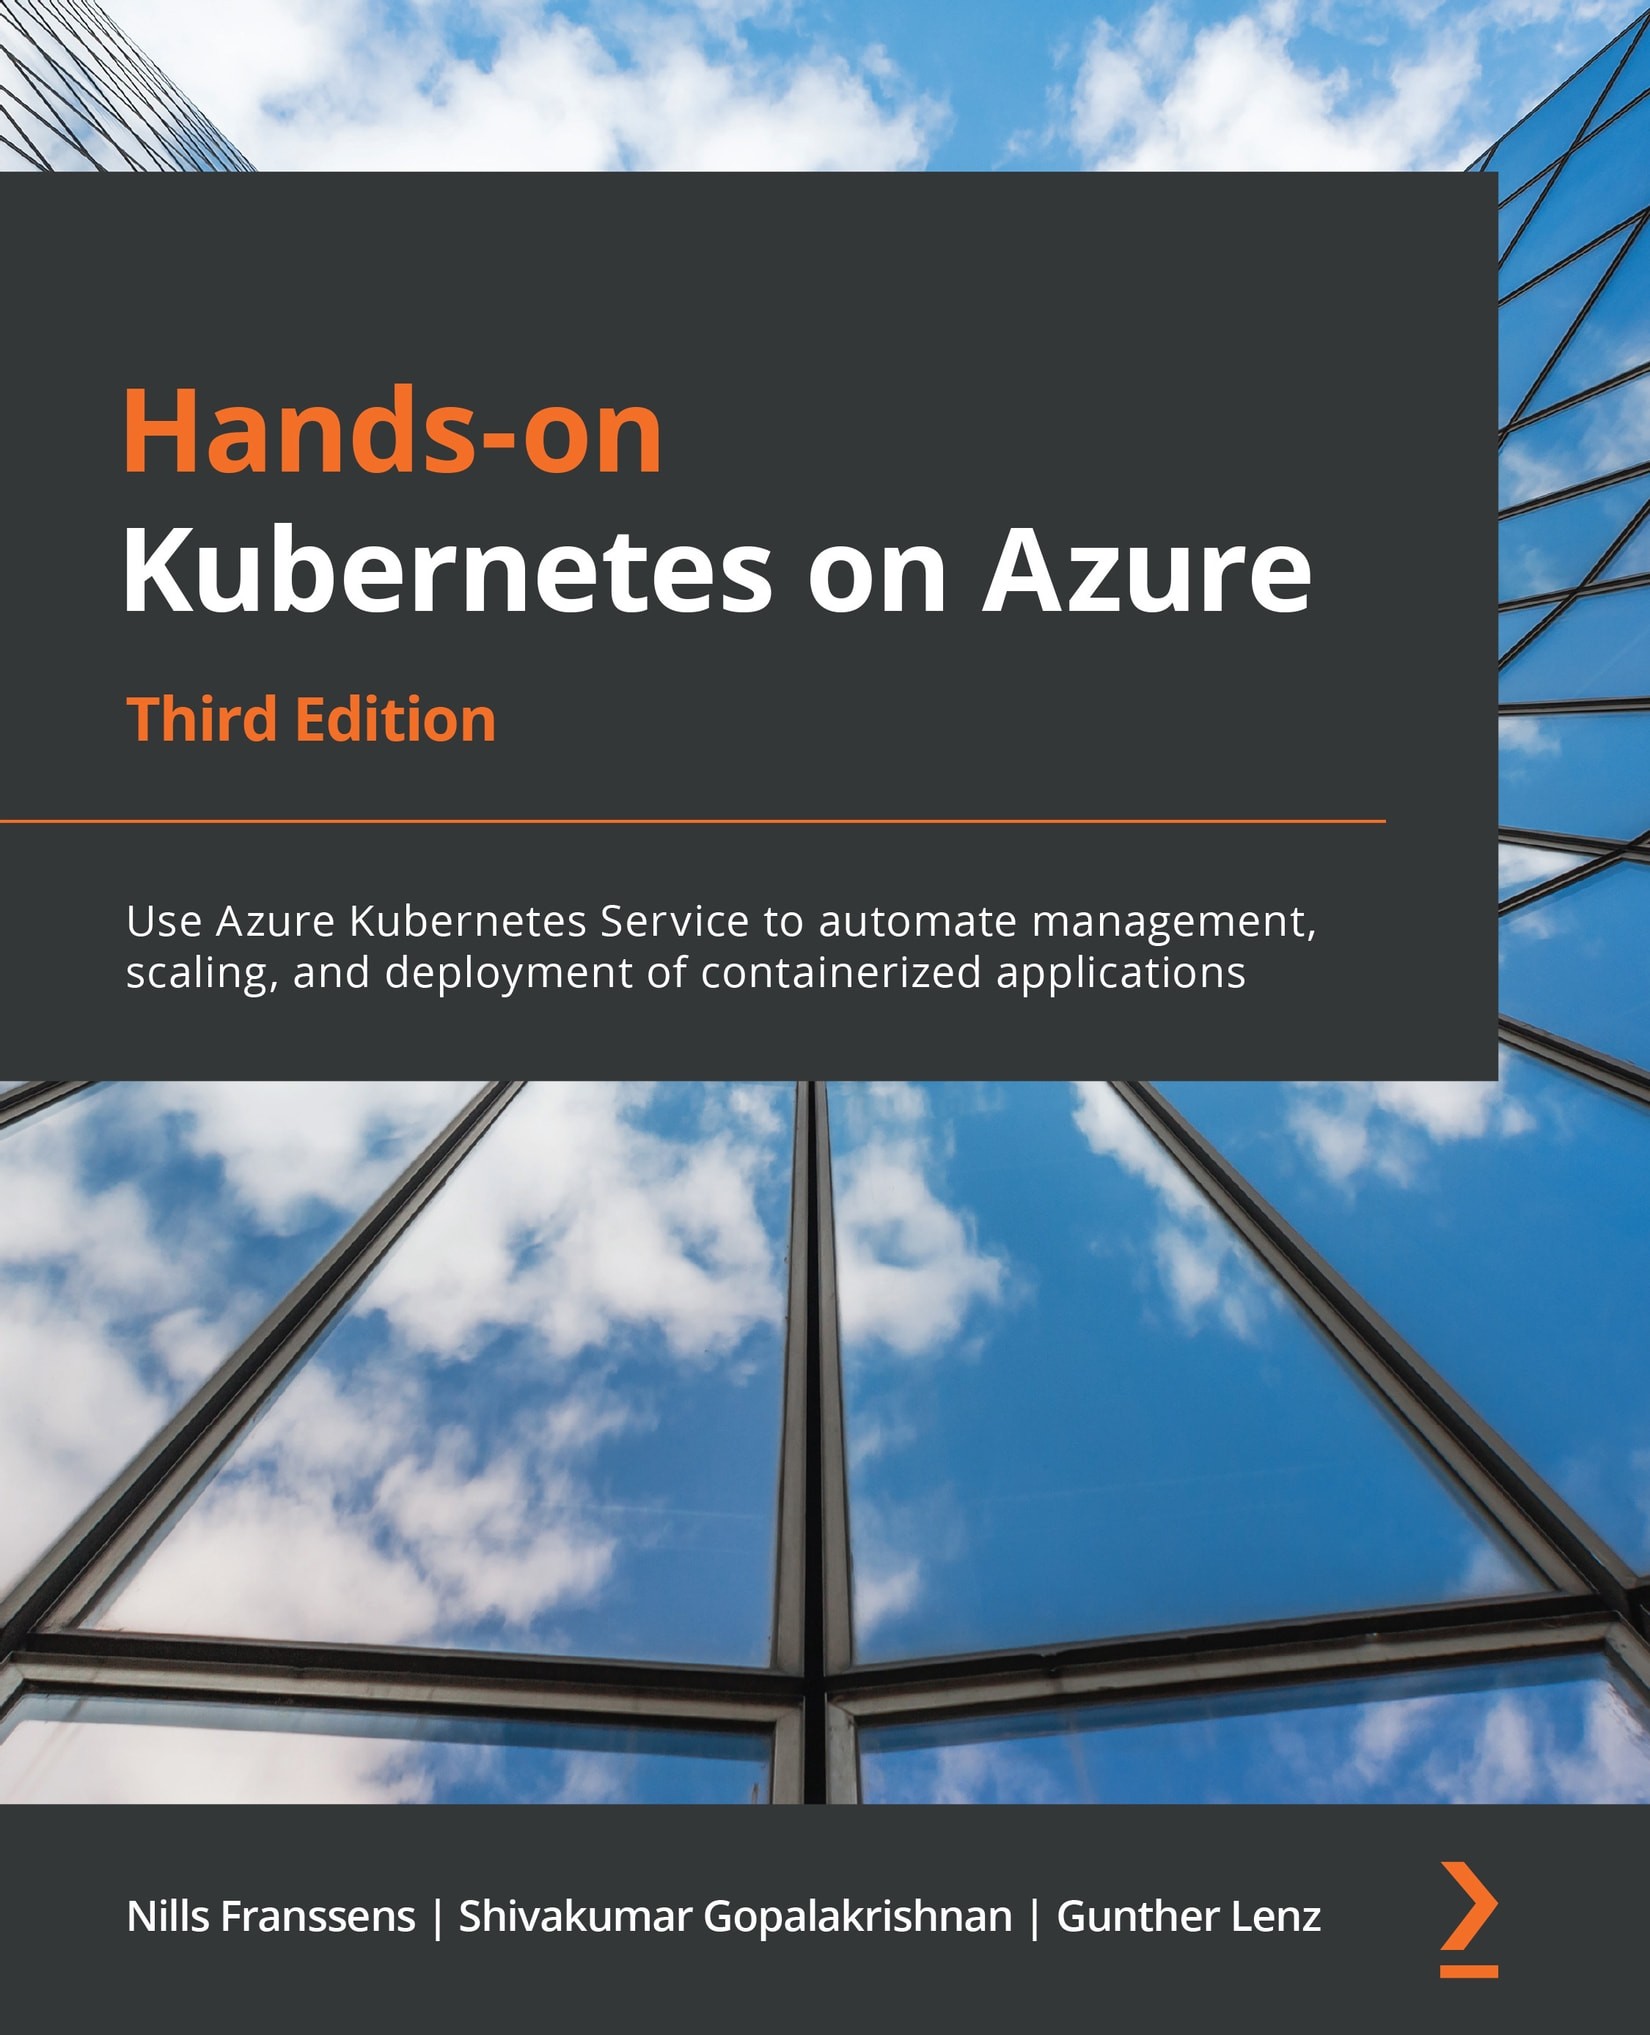 Hands-On Kubernetes on Azure - Third Edition: Use Azure Kubernetes Service to Automate Management, Scaling, and Deployment of Containerized Applications